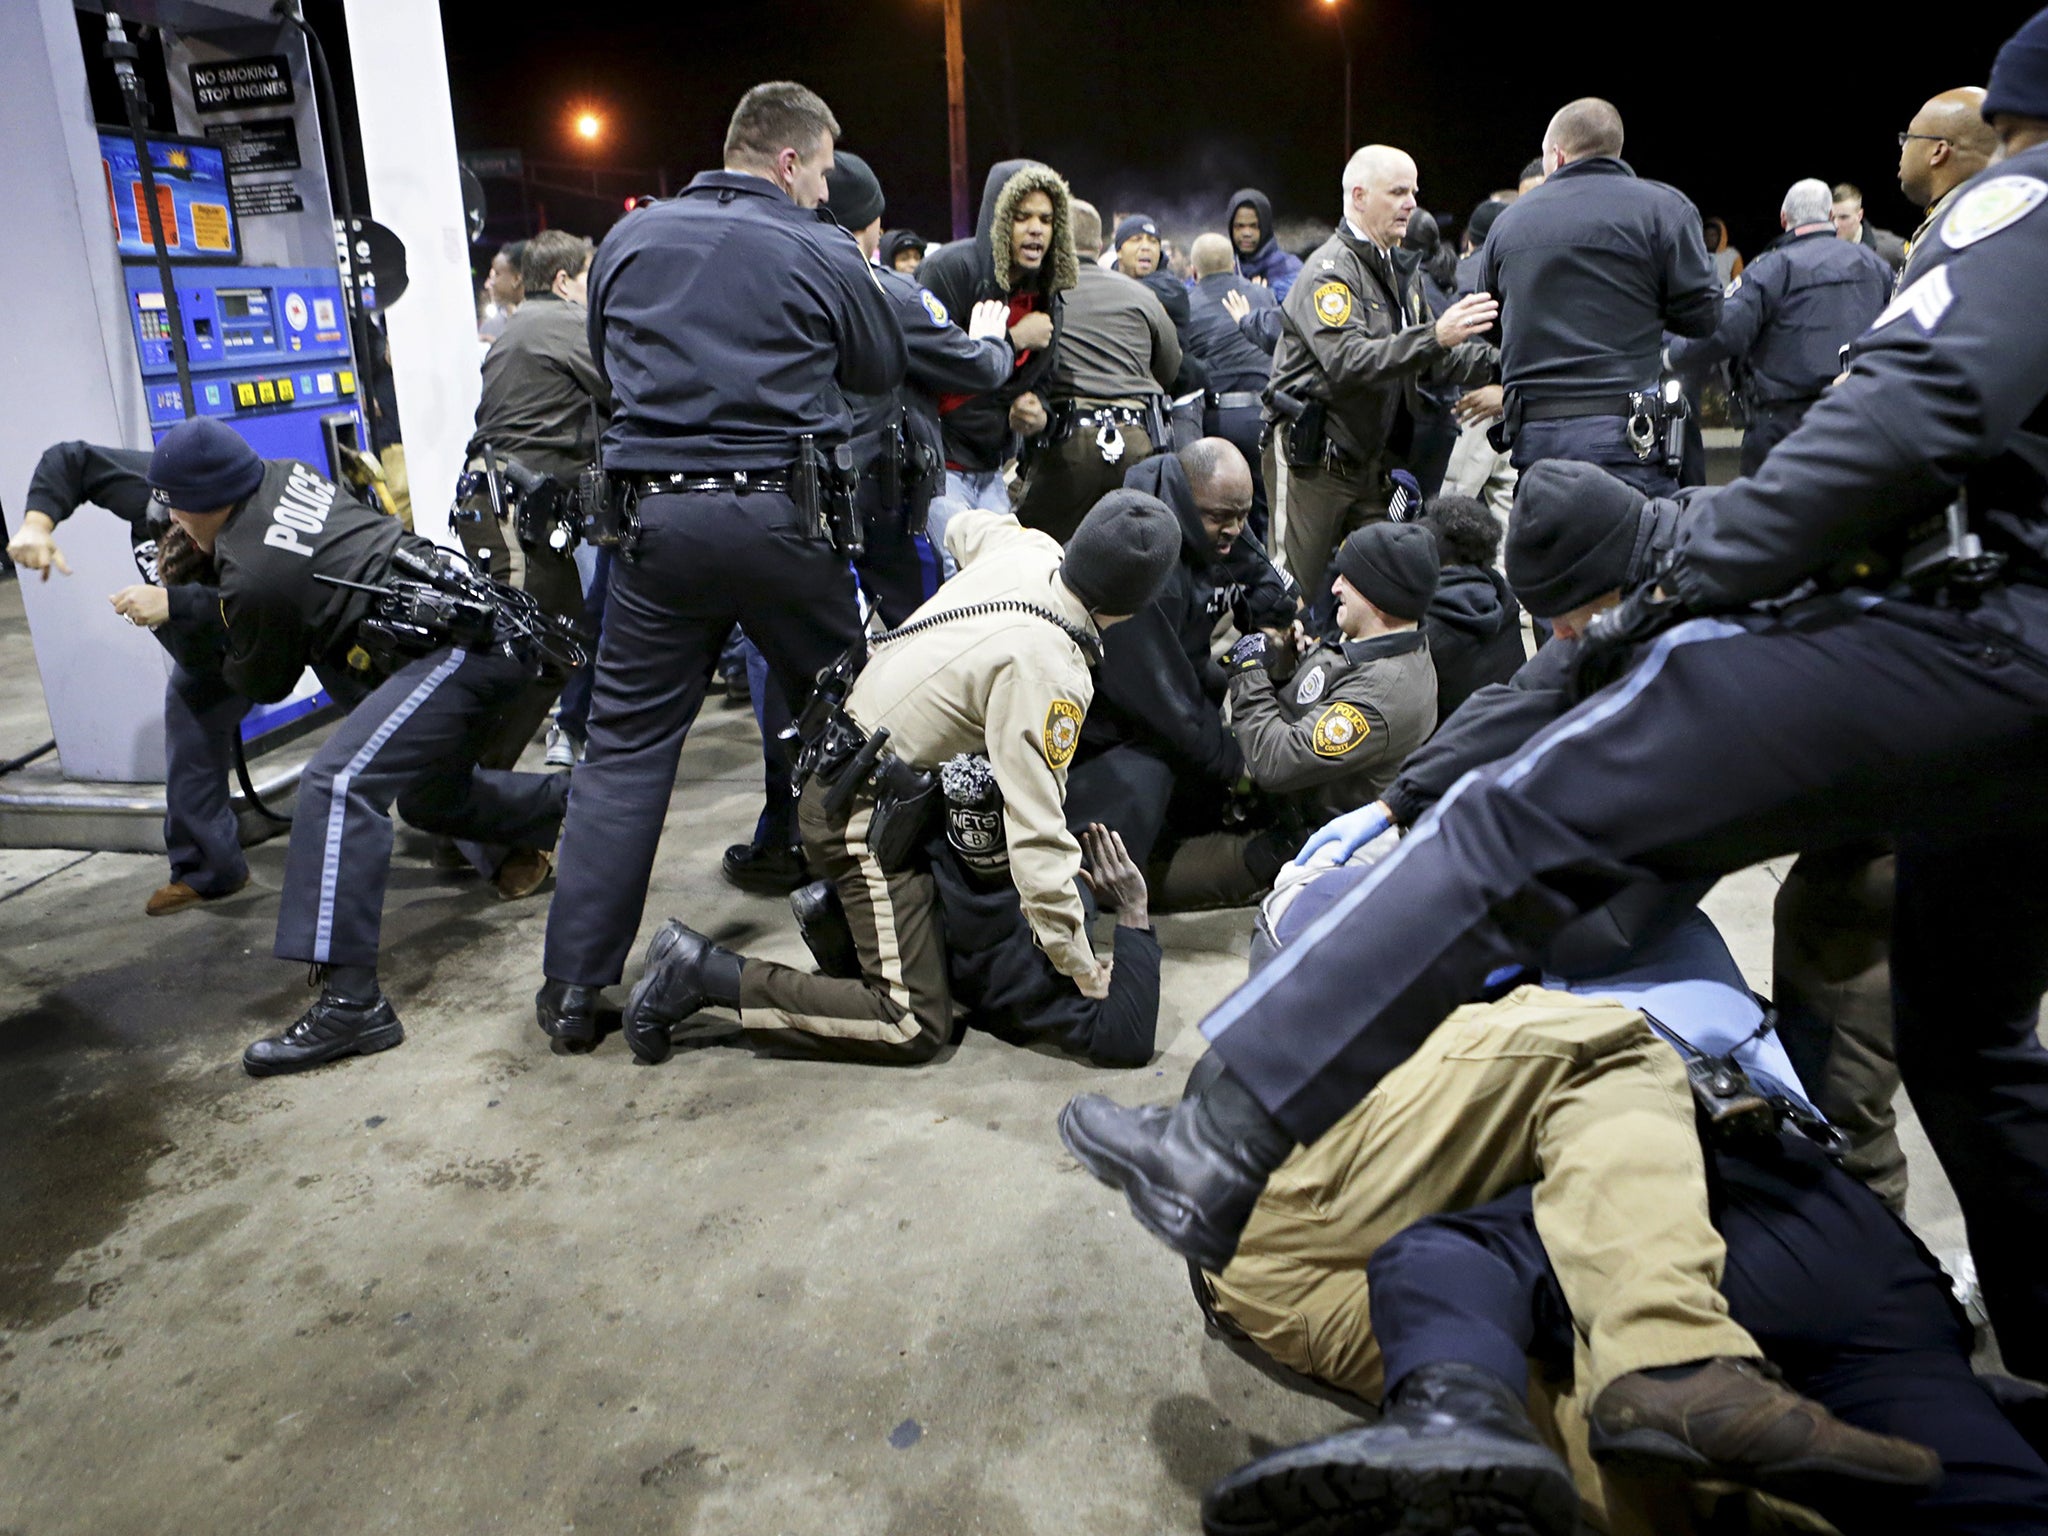 Police try to control a crowd on the lot of a gas station